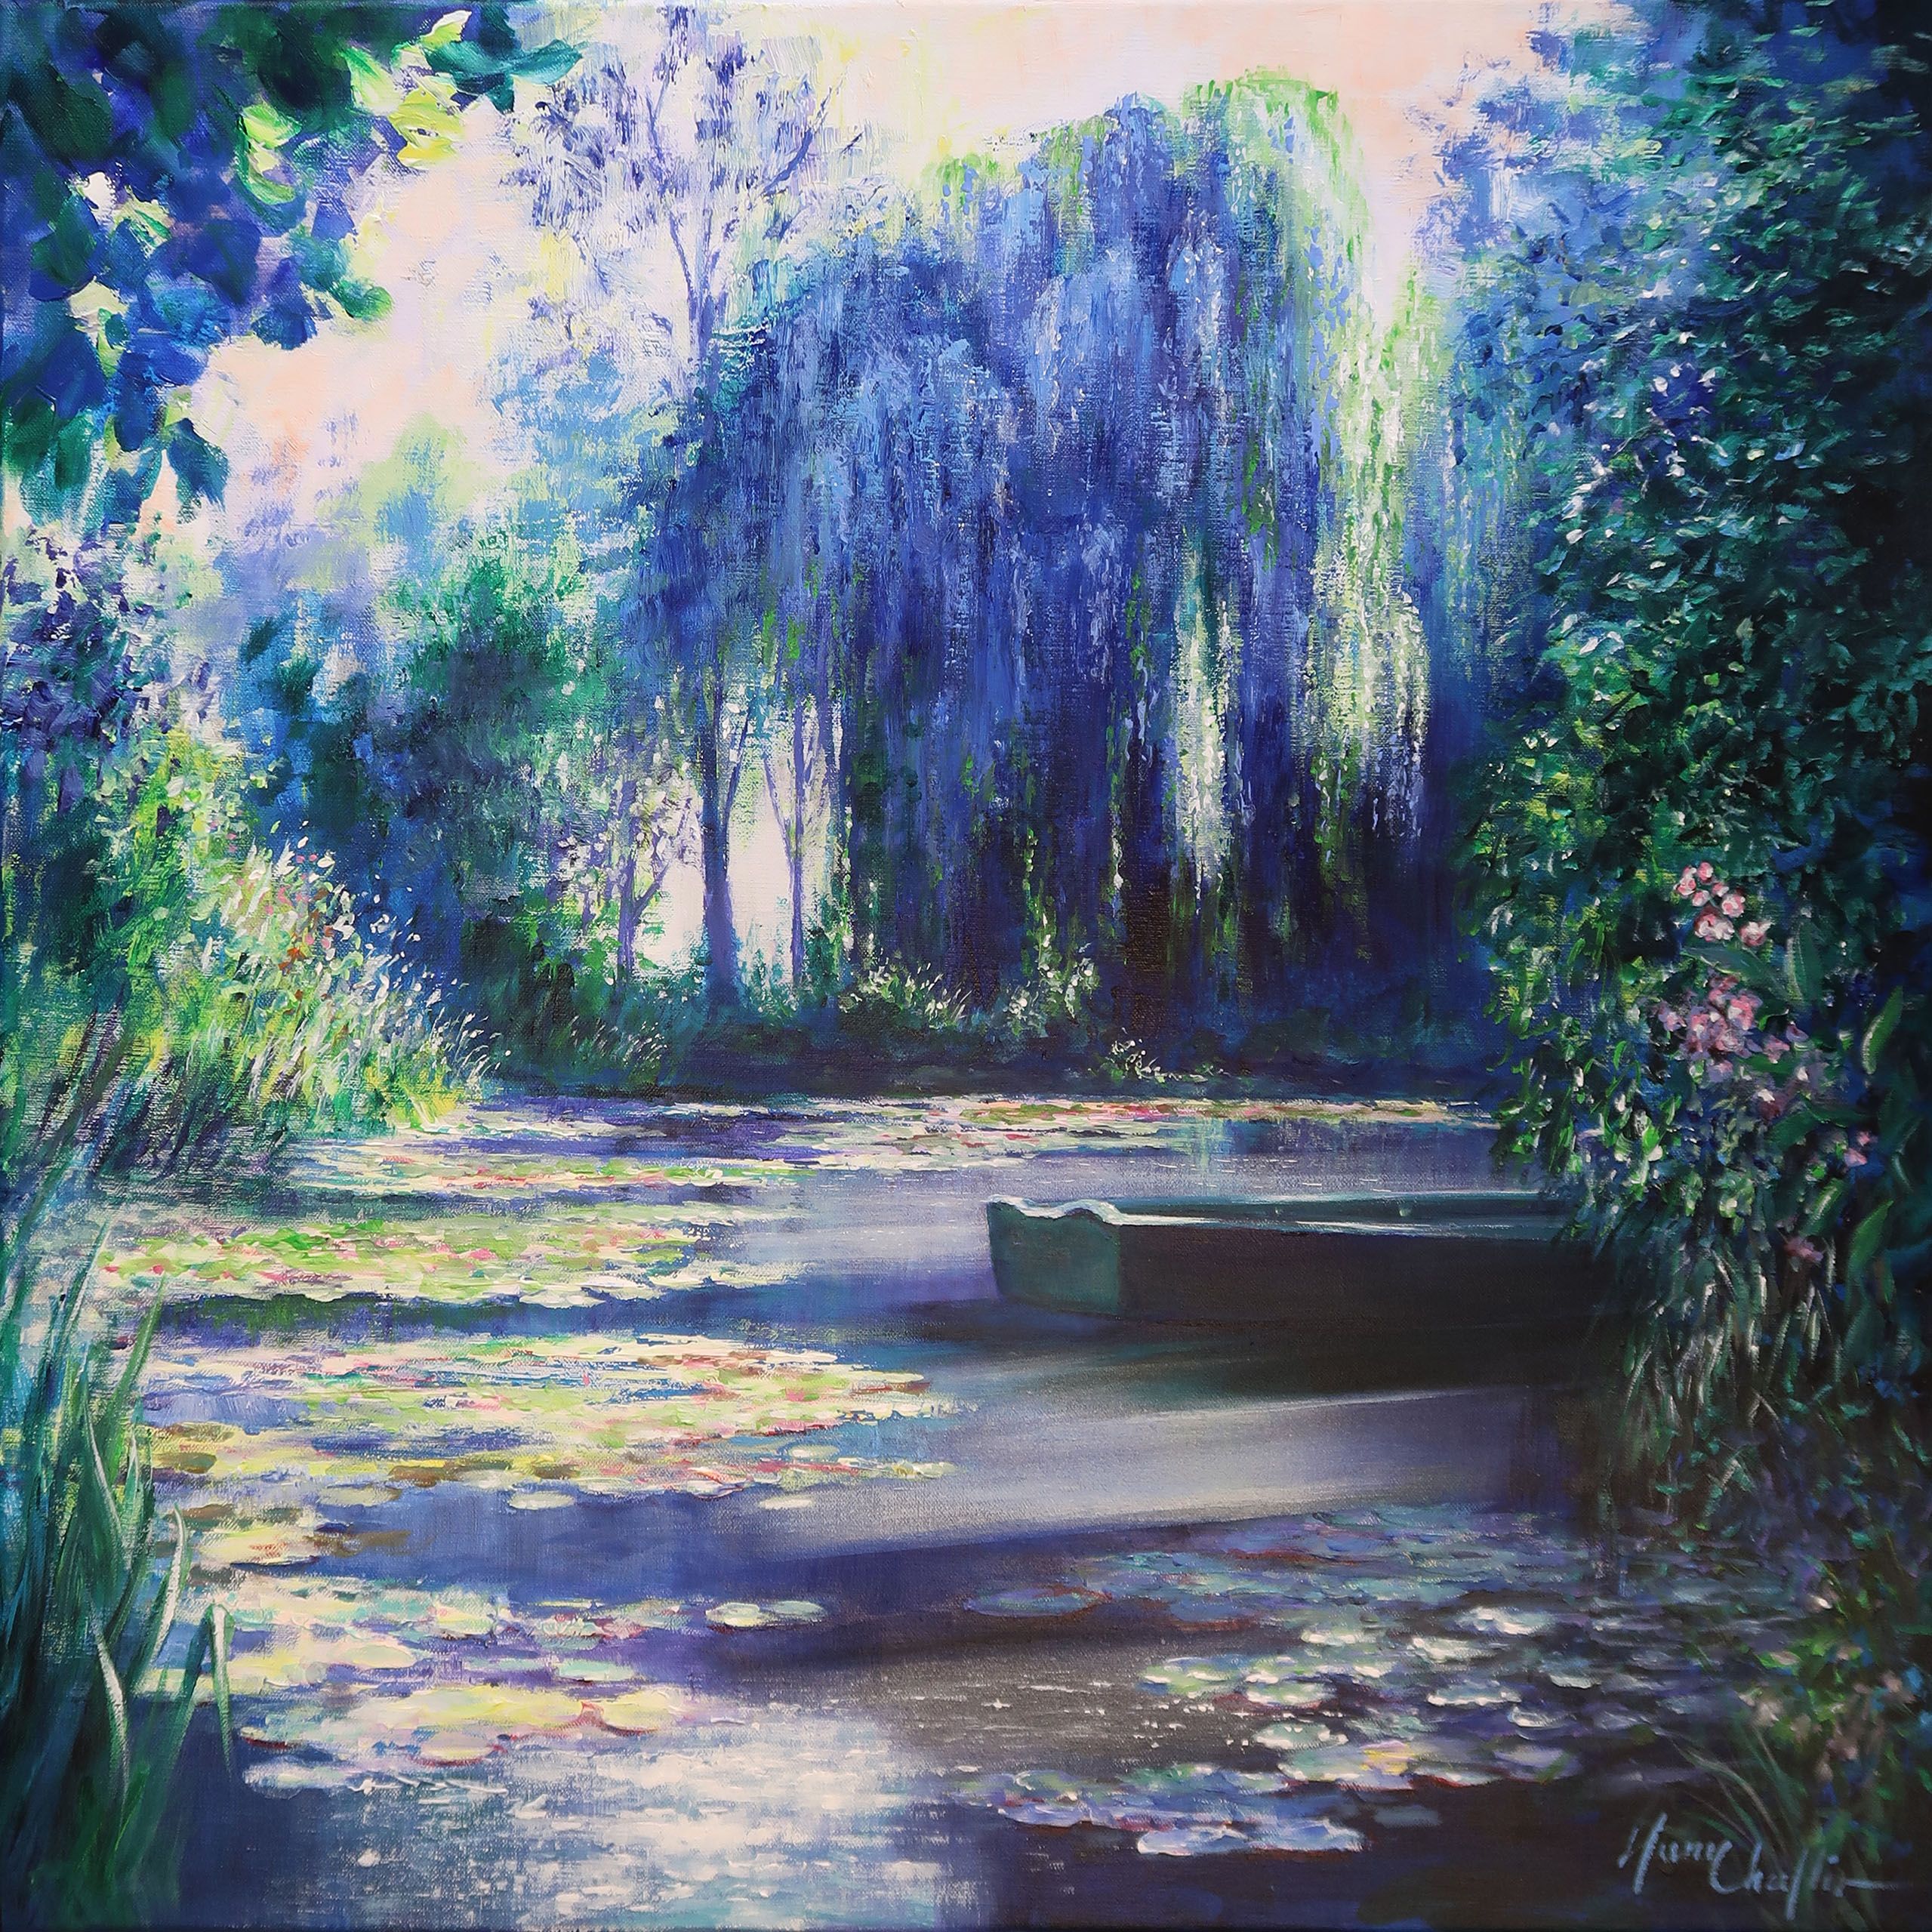 Harmony in blue at Giverny ( water gardens at Claude Monet’s house ) by Mary Chaplin